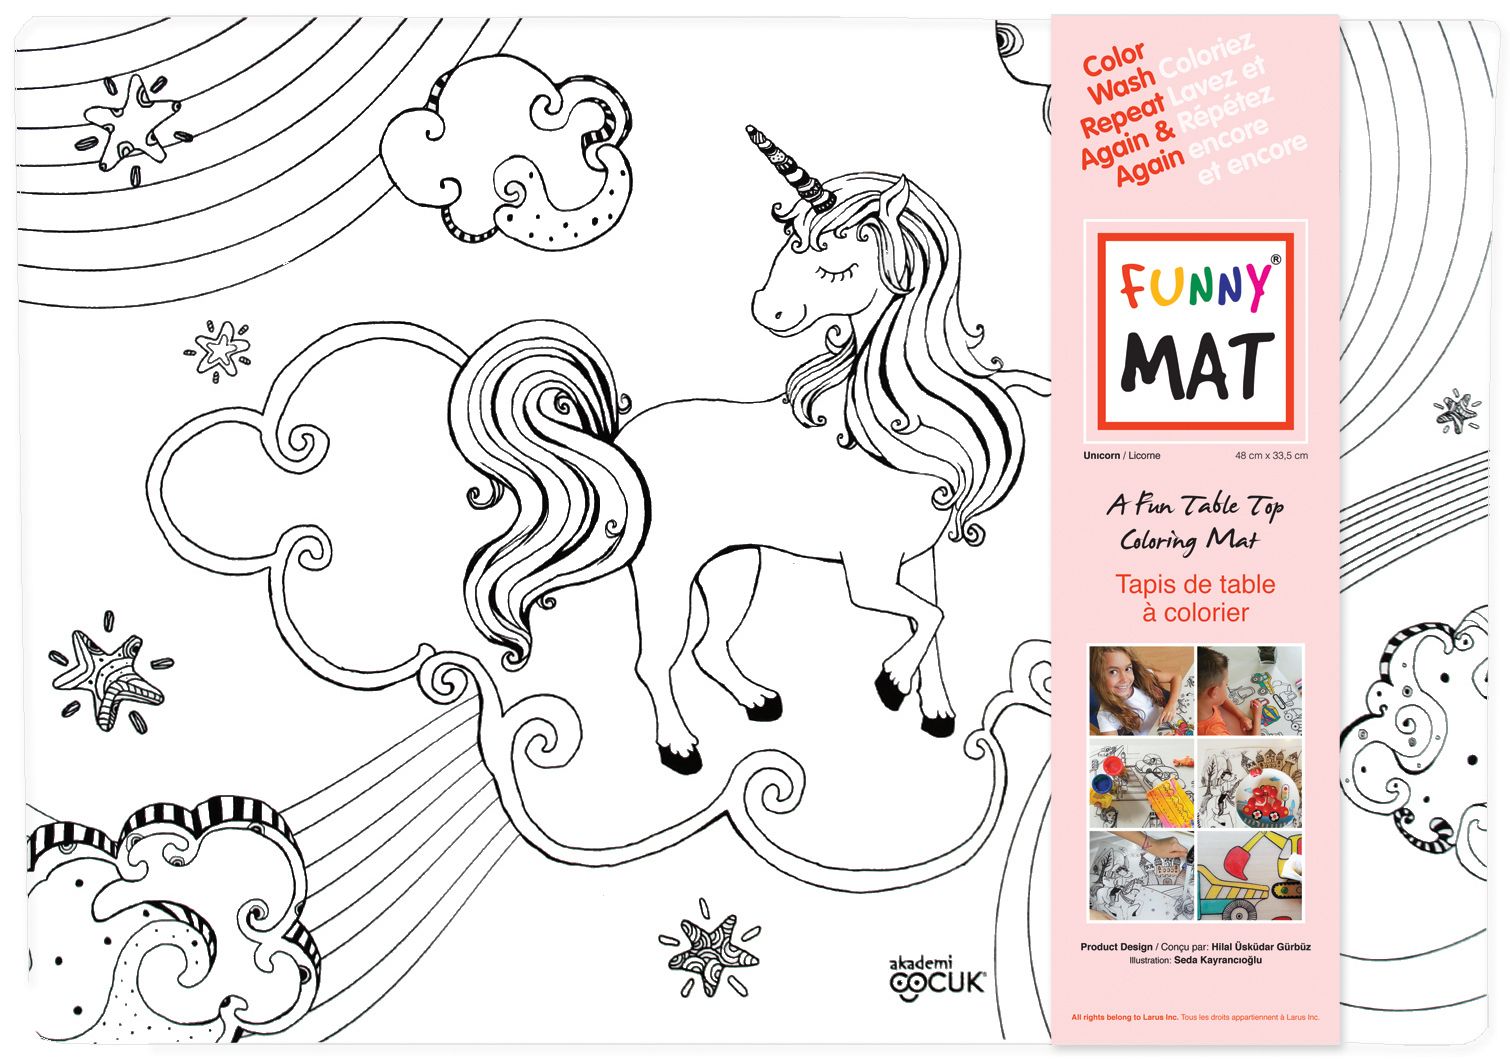 Funny MAT A Fun Table Top Coloring Mat - Unicorn (White, Single) - Blesket Canada